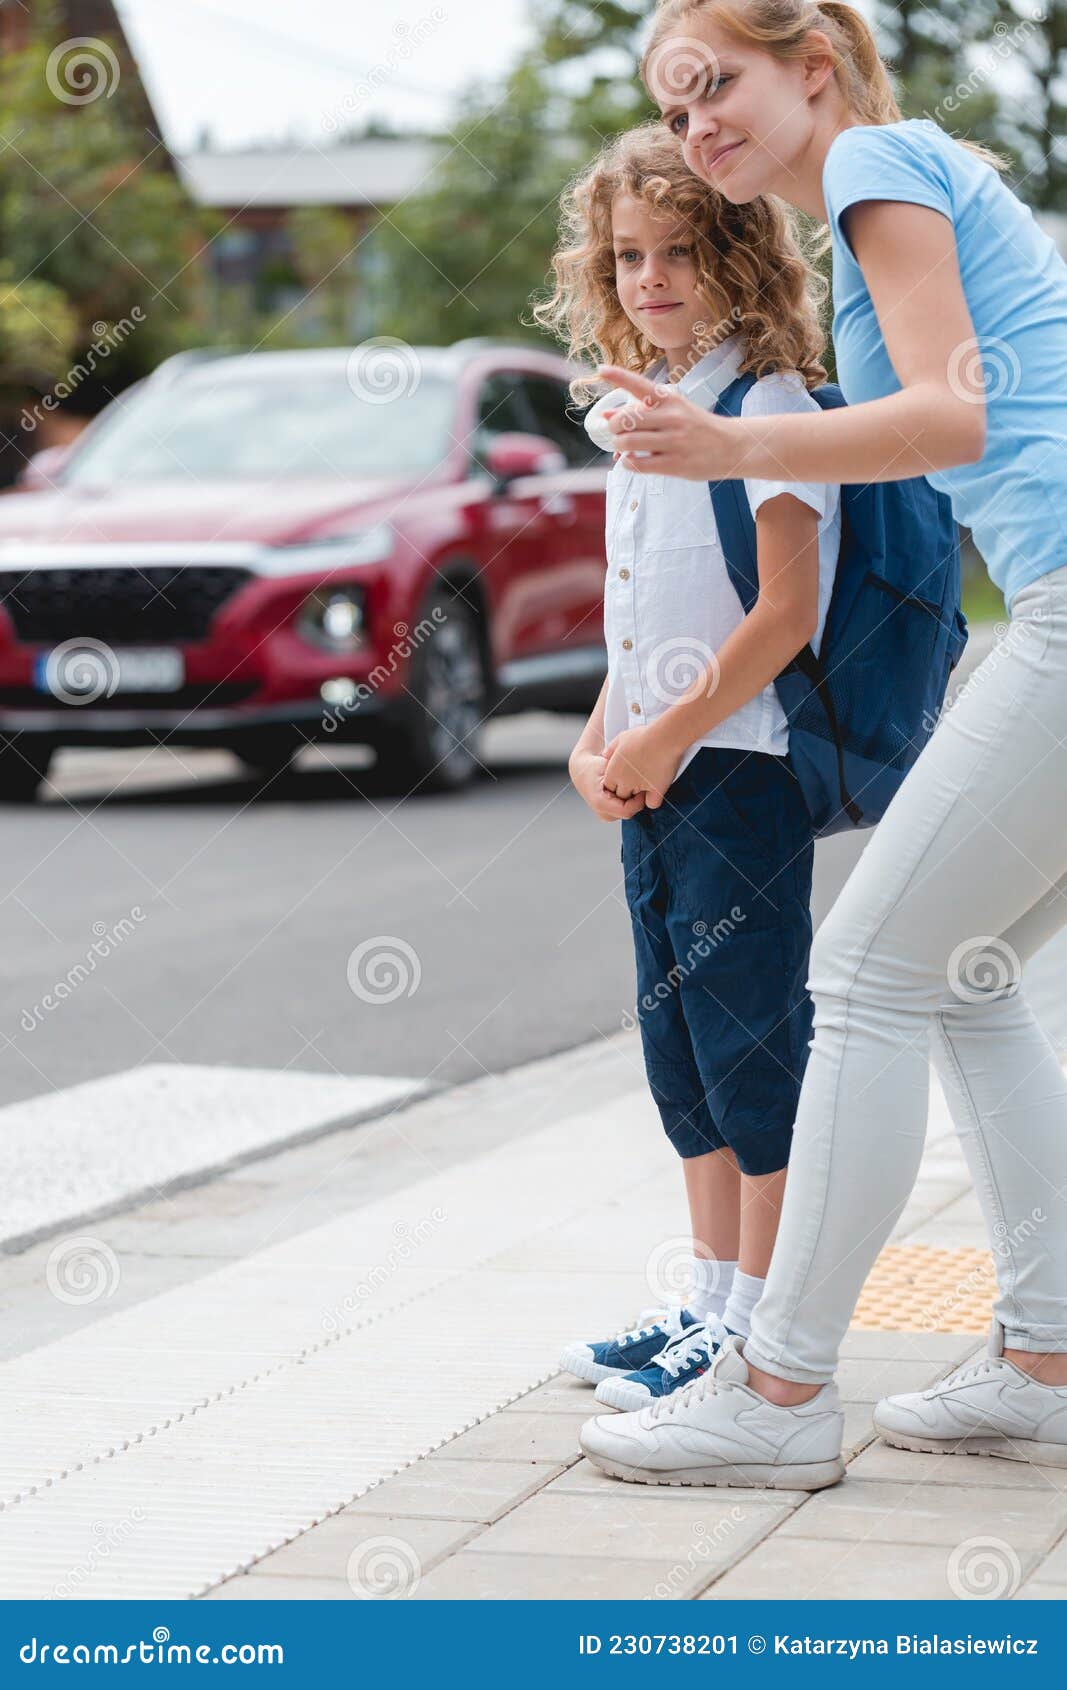 sister explains to the boy how to cross the street safely